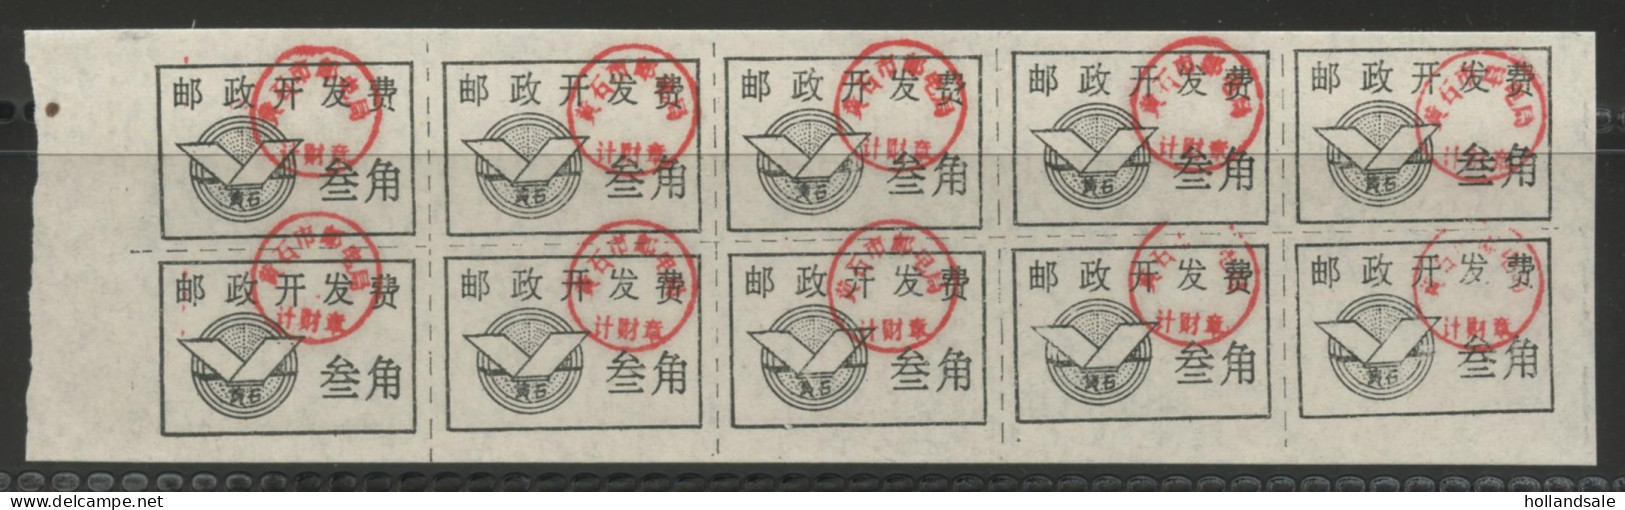 CHINA PRC / ADDED CHARGE - Labels Of Huangshi City, Hubei Prov. D&O 12-0167.  Block Of 10. - Timbres-taxe